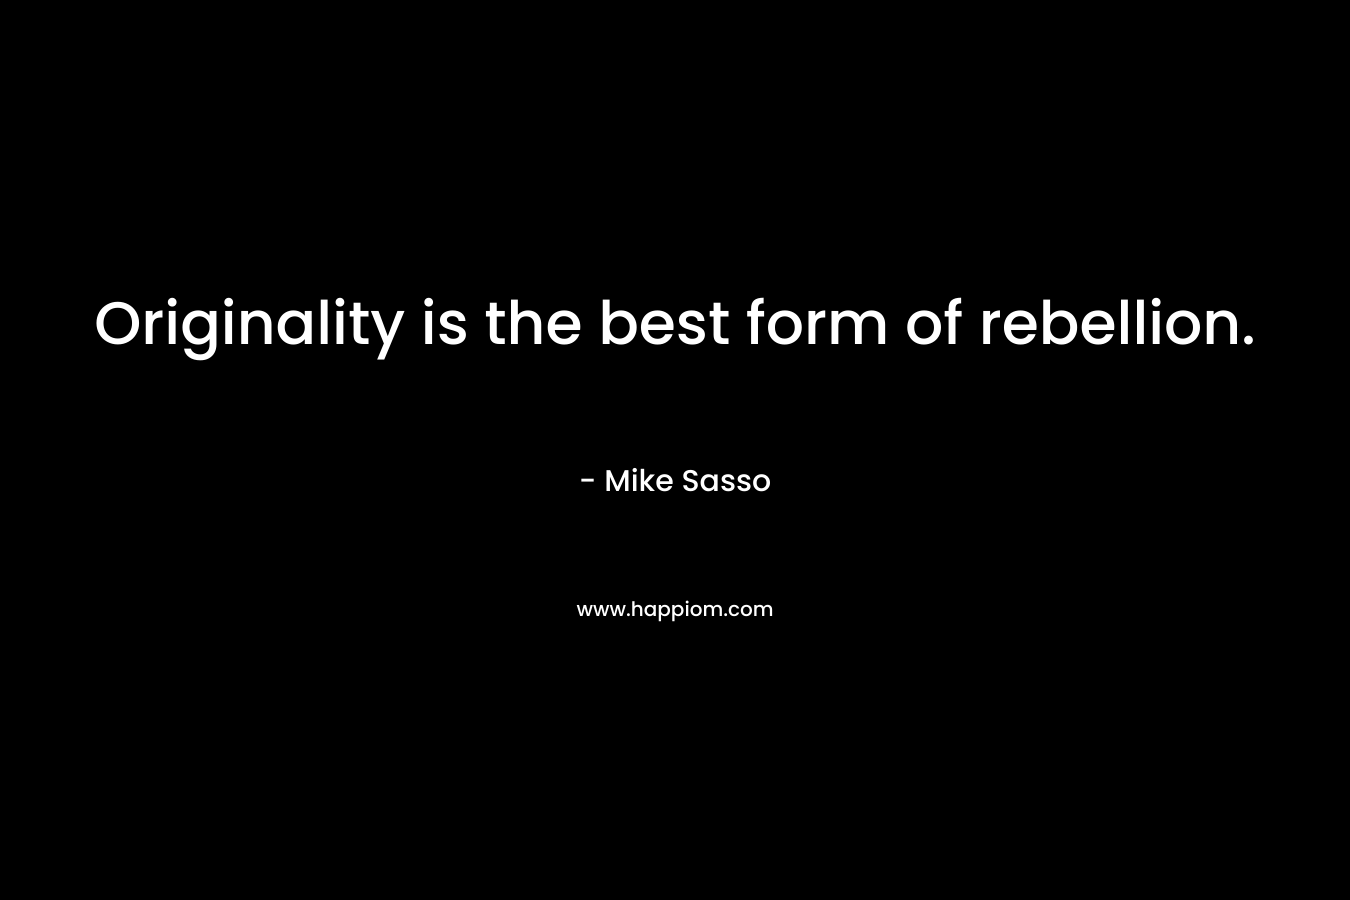 Originality is the best form of rebellion. – Mike Sasso